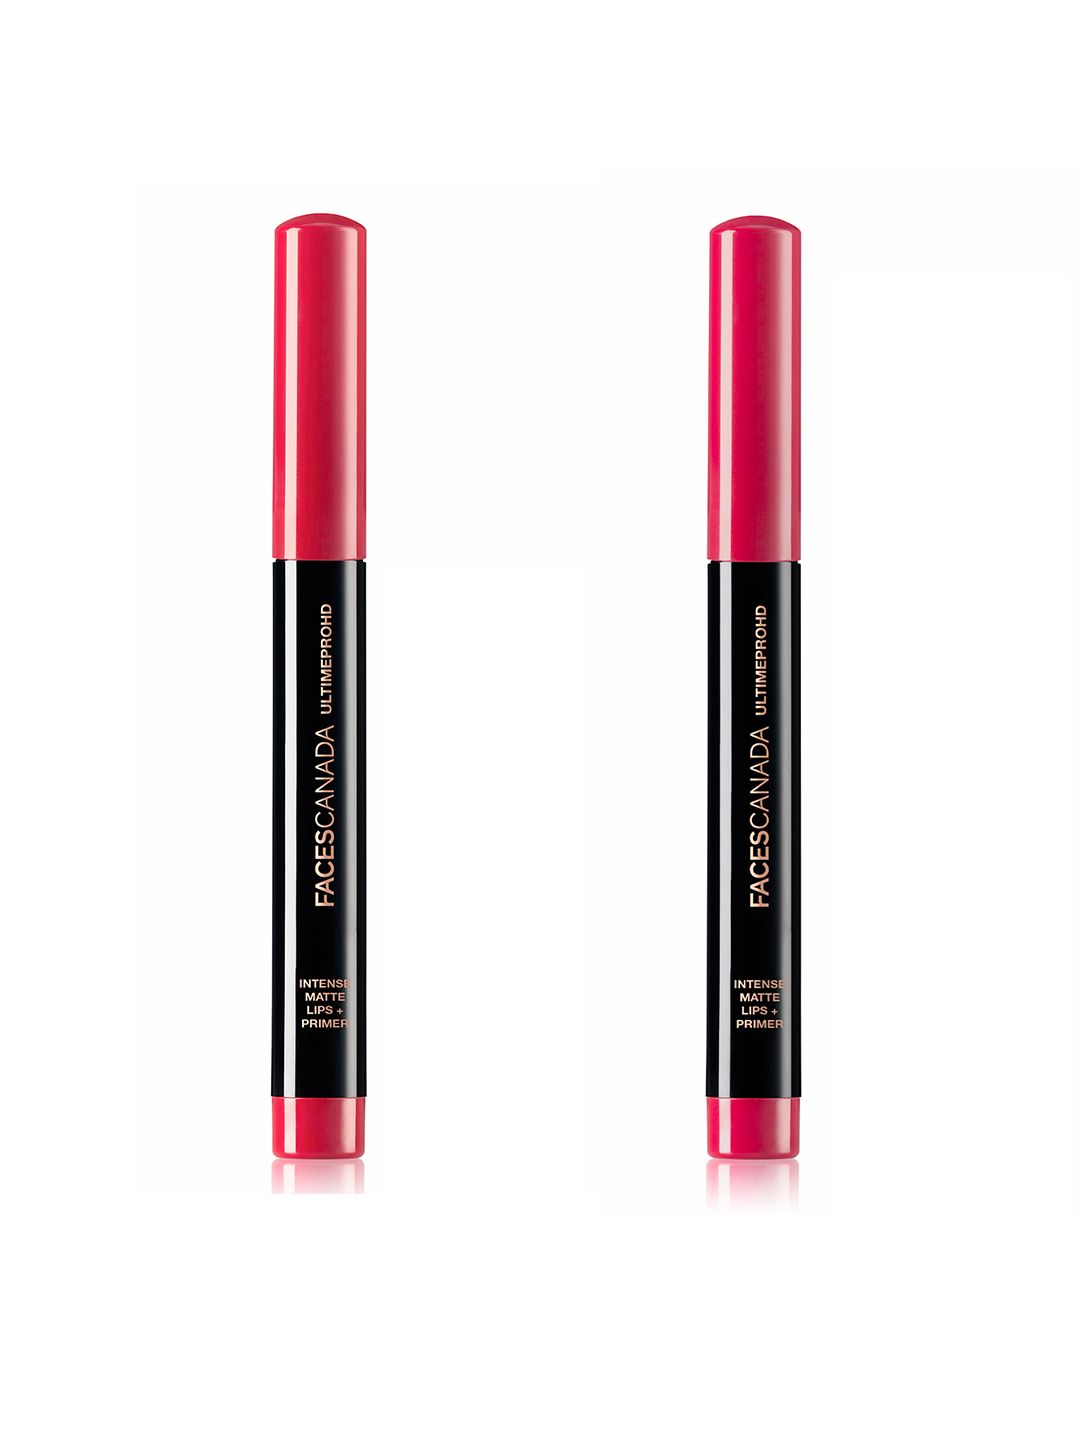 FACES CANADA Set of 2 UltimePro HD Intense Matte Lipsticks - Bold Wine & Dash of Pink Price in India